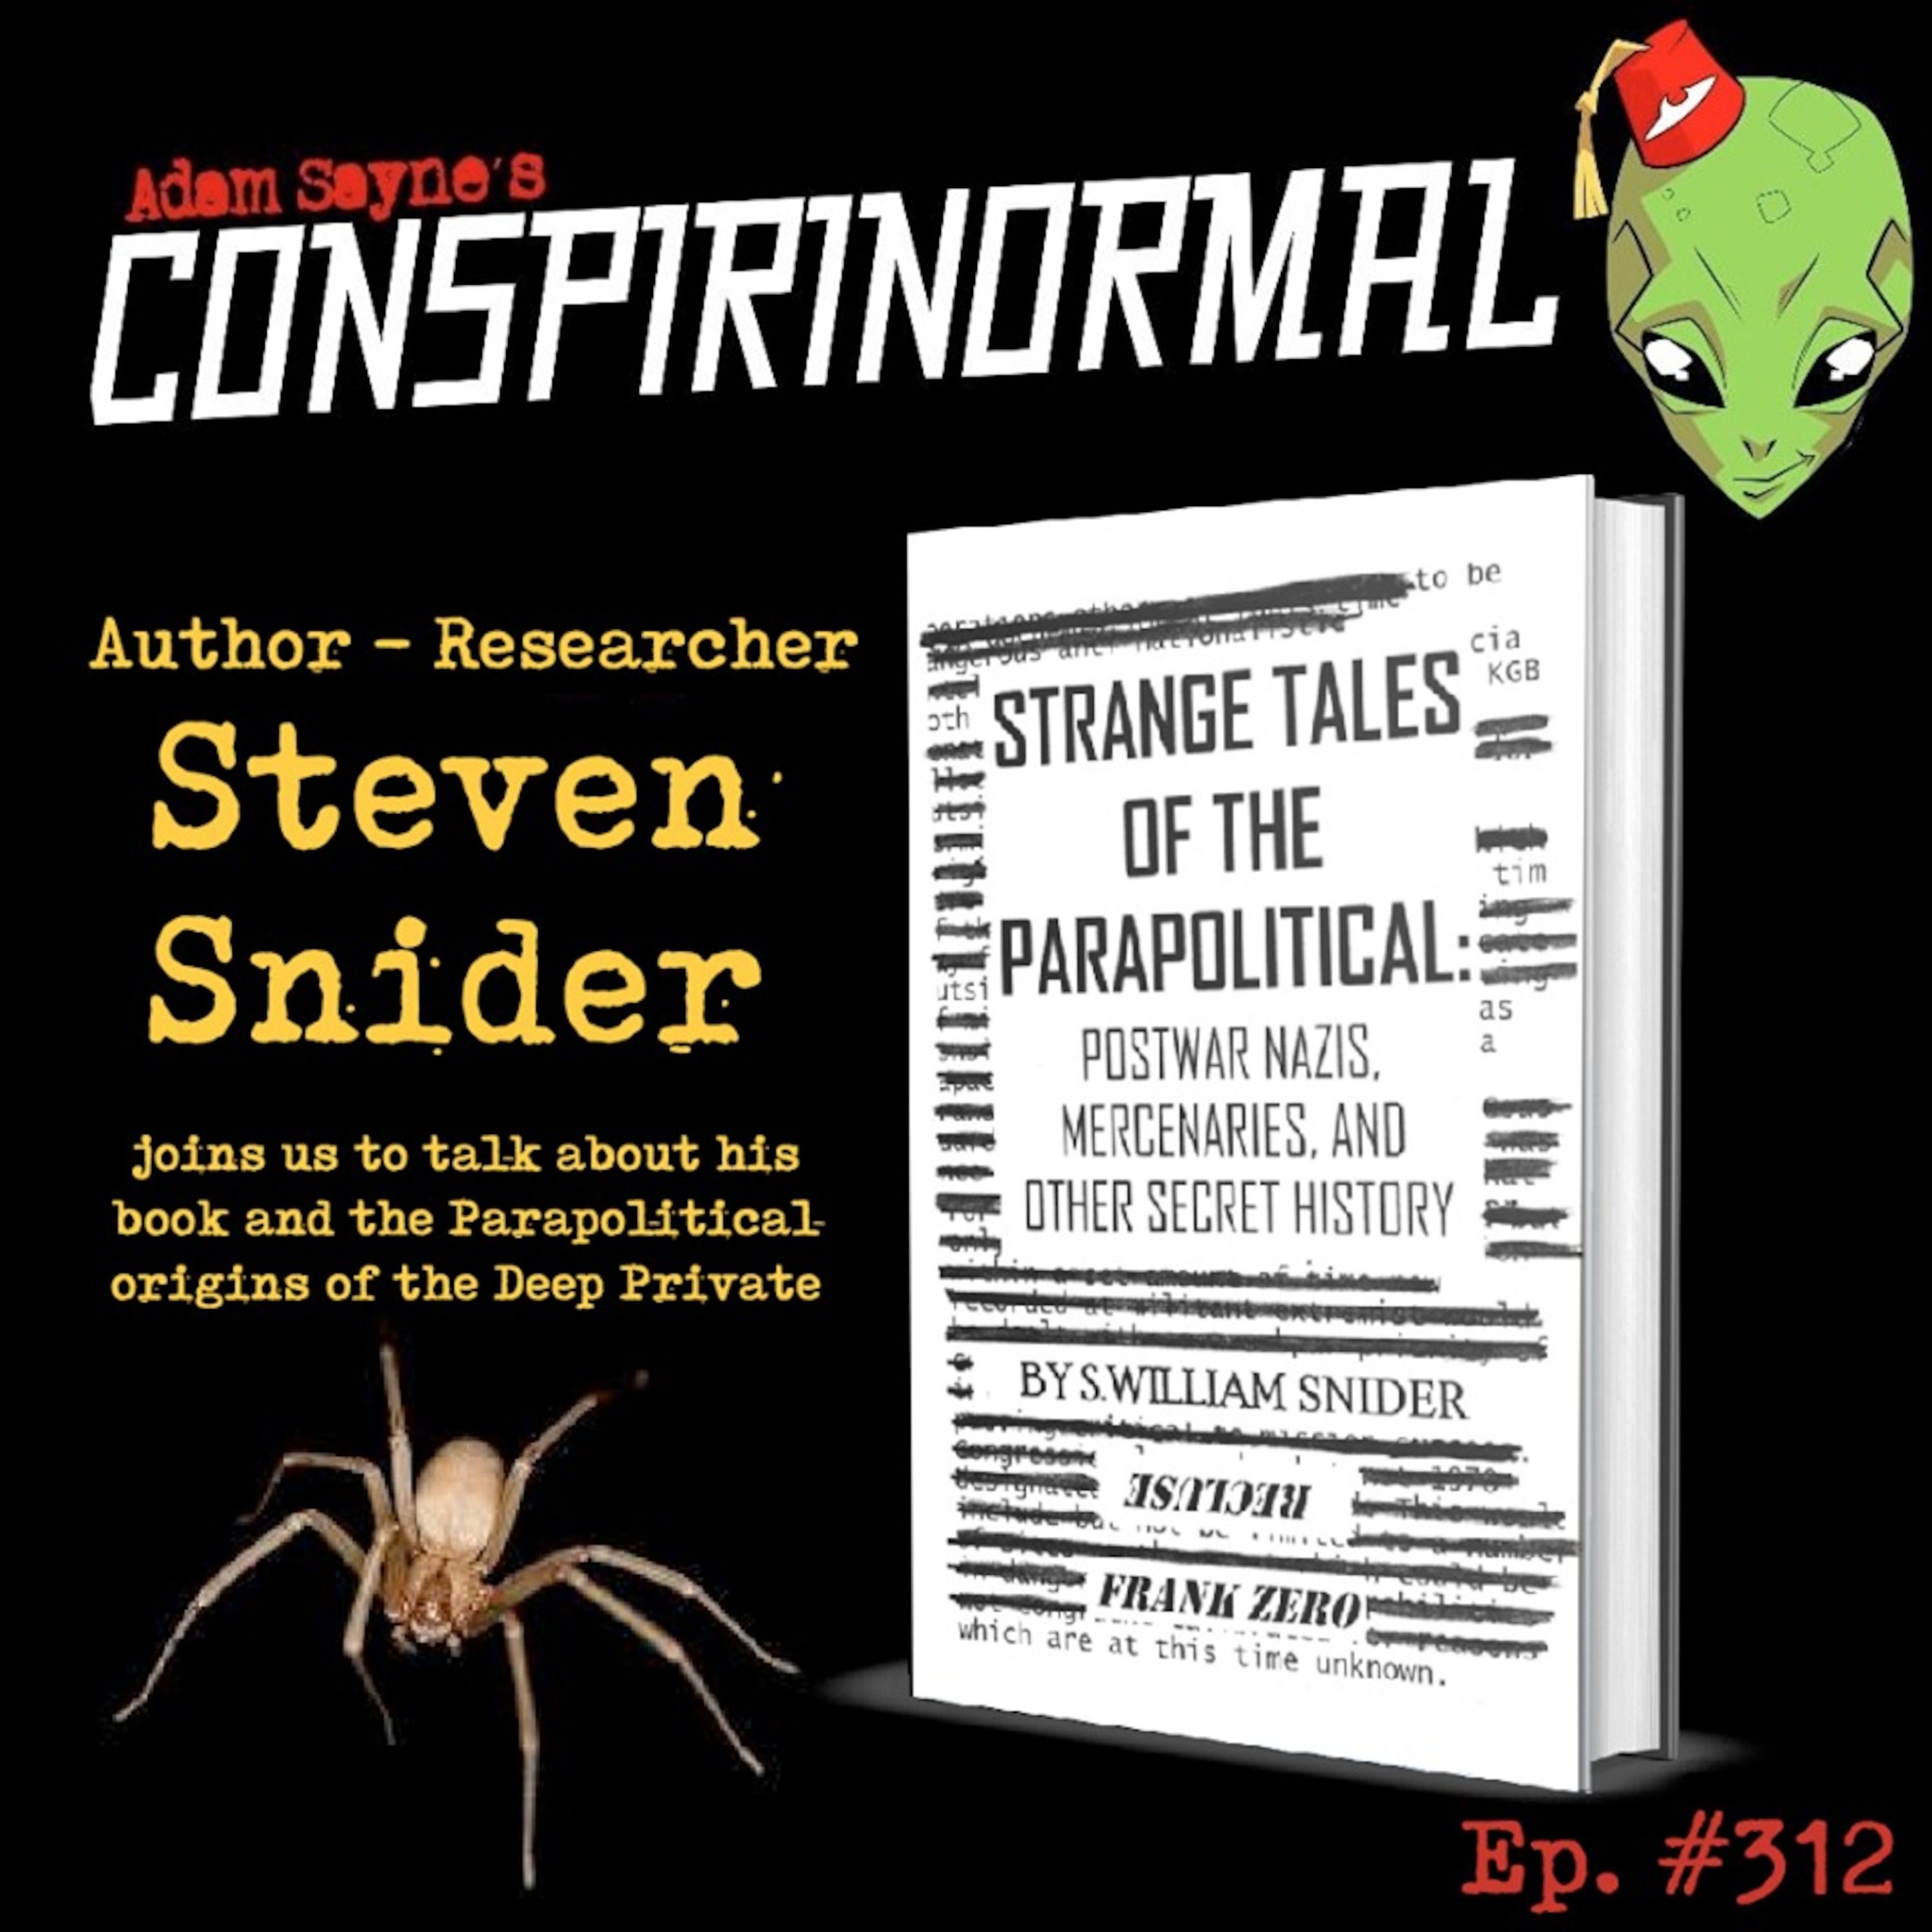 Strange Tales of the Parapolitical by S. William Snider